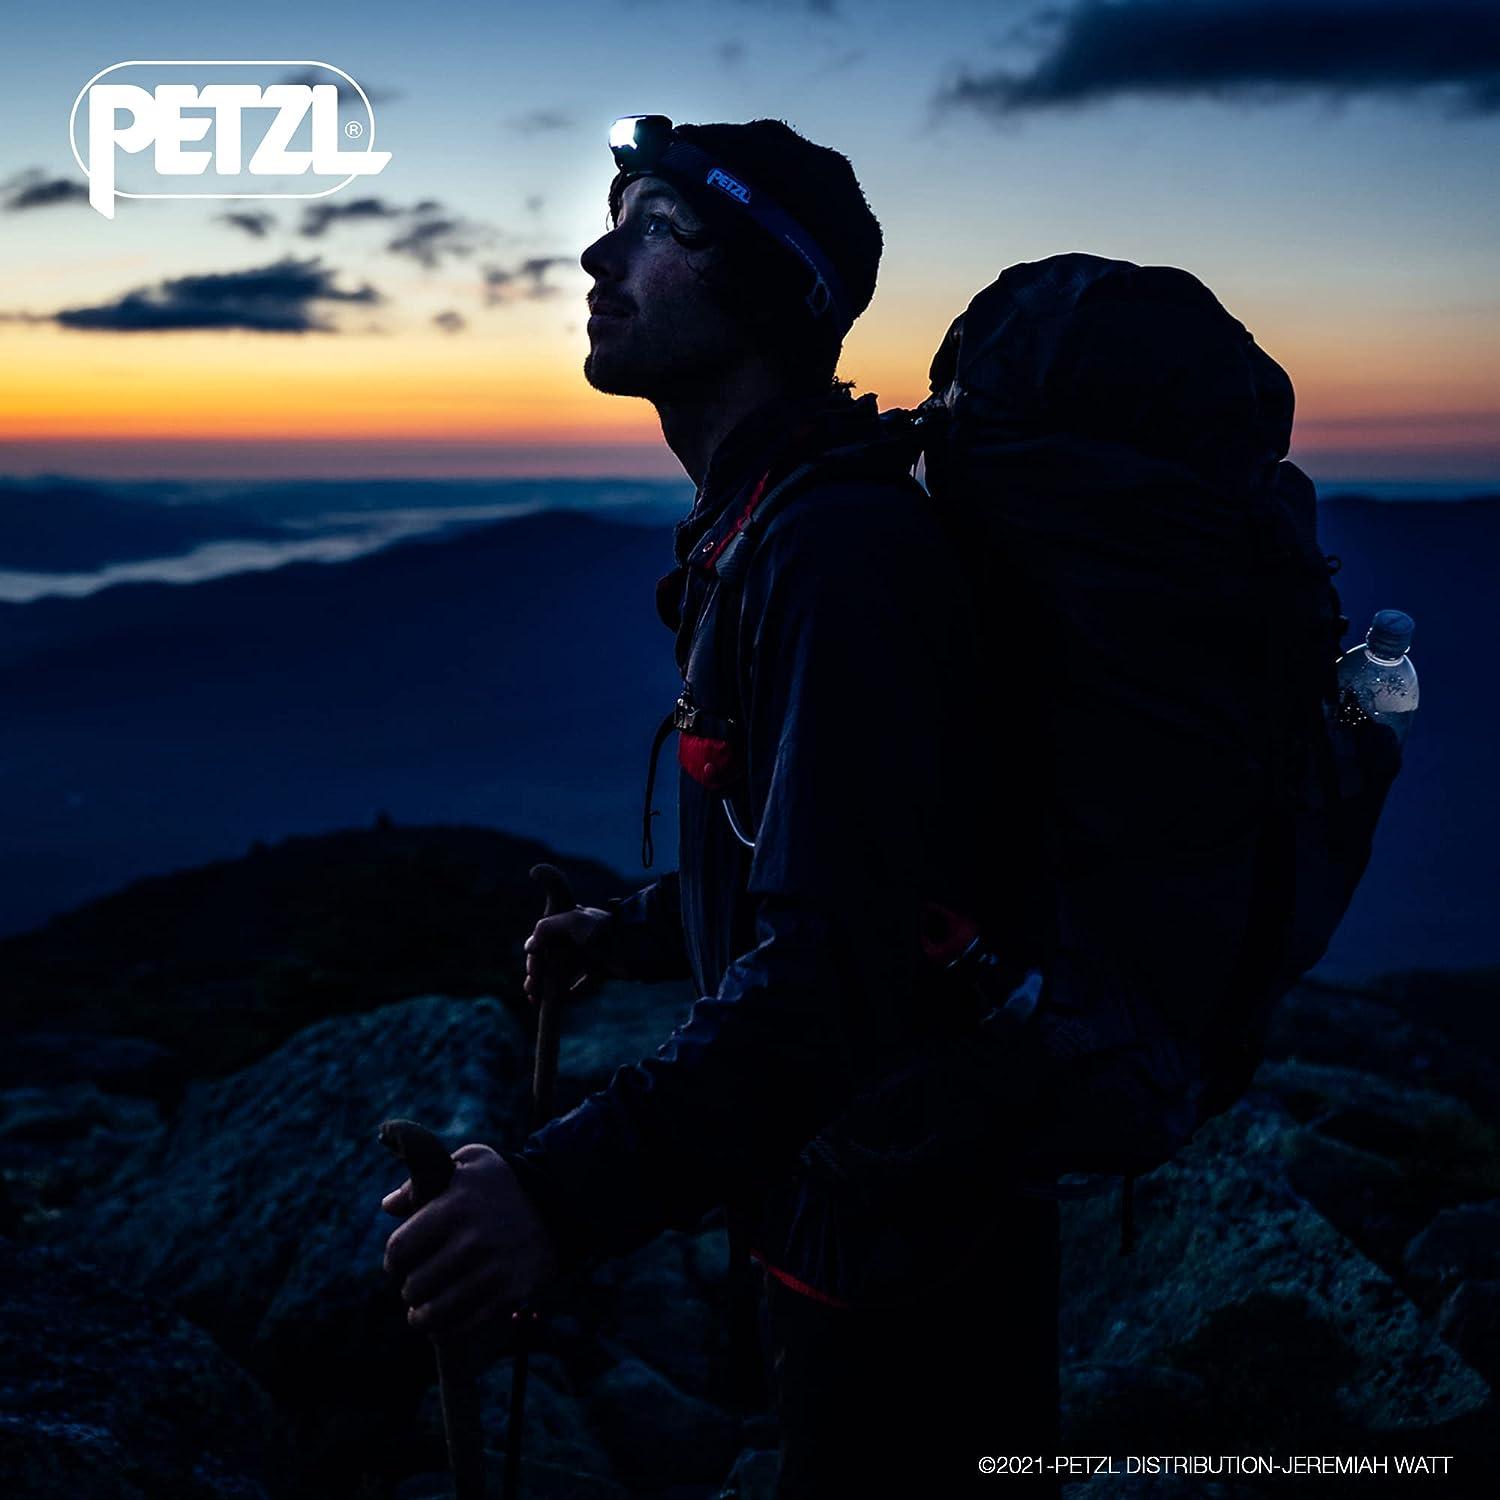 PETZL, Tikka Outdoor Headlamp with 300 Lumens for Camping and Hiking